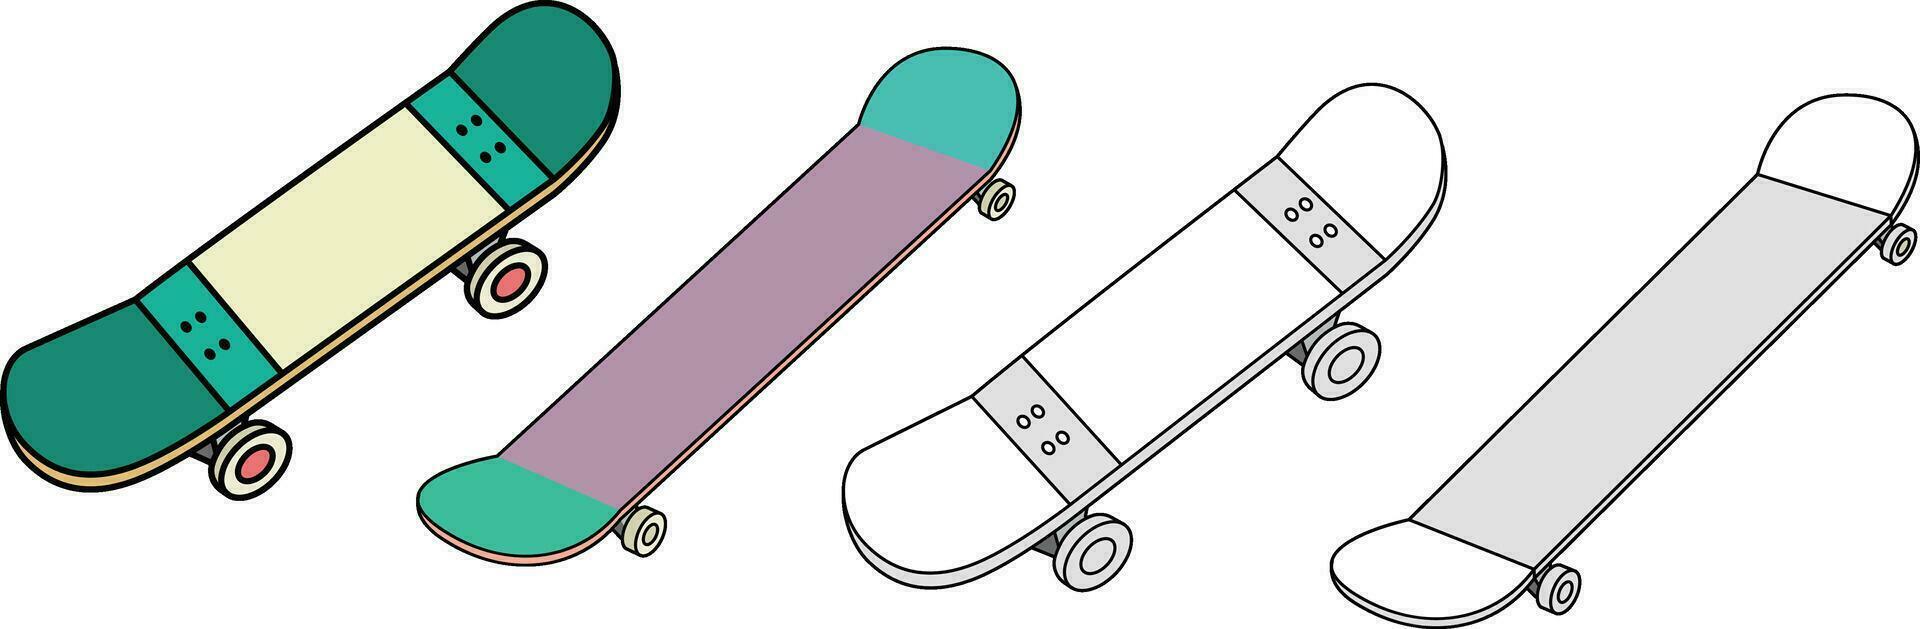 Skateboard in different colors and angles vector illustration , Skating board , roller skate , freewheel colored and black and white vector images